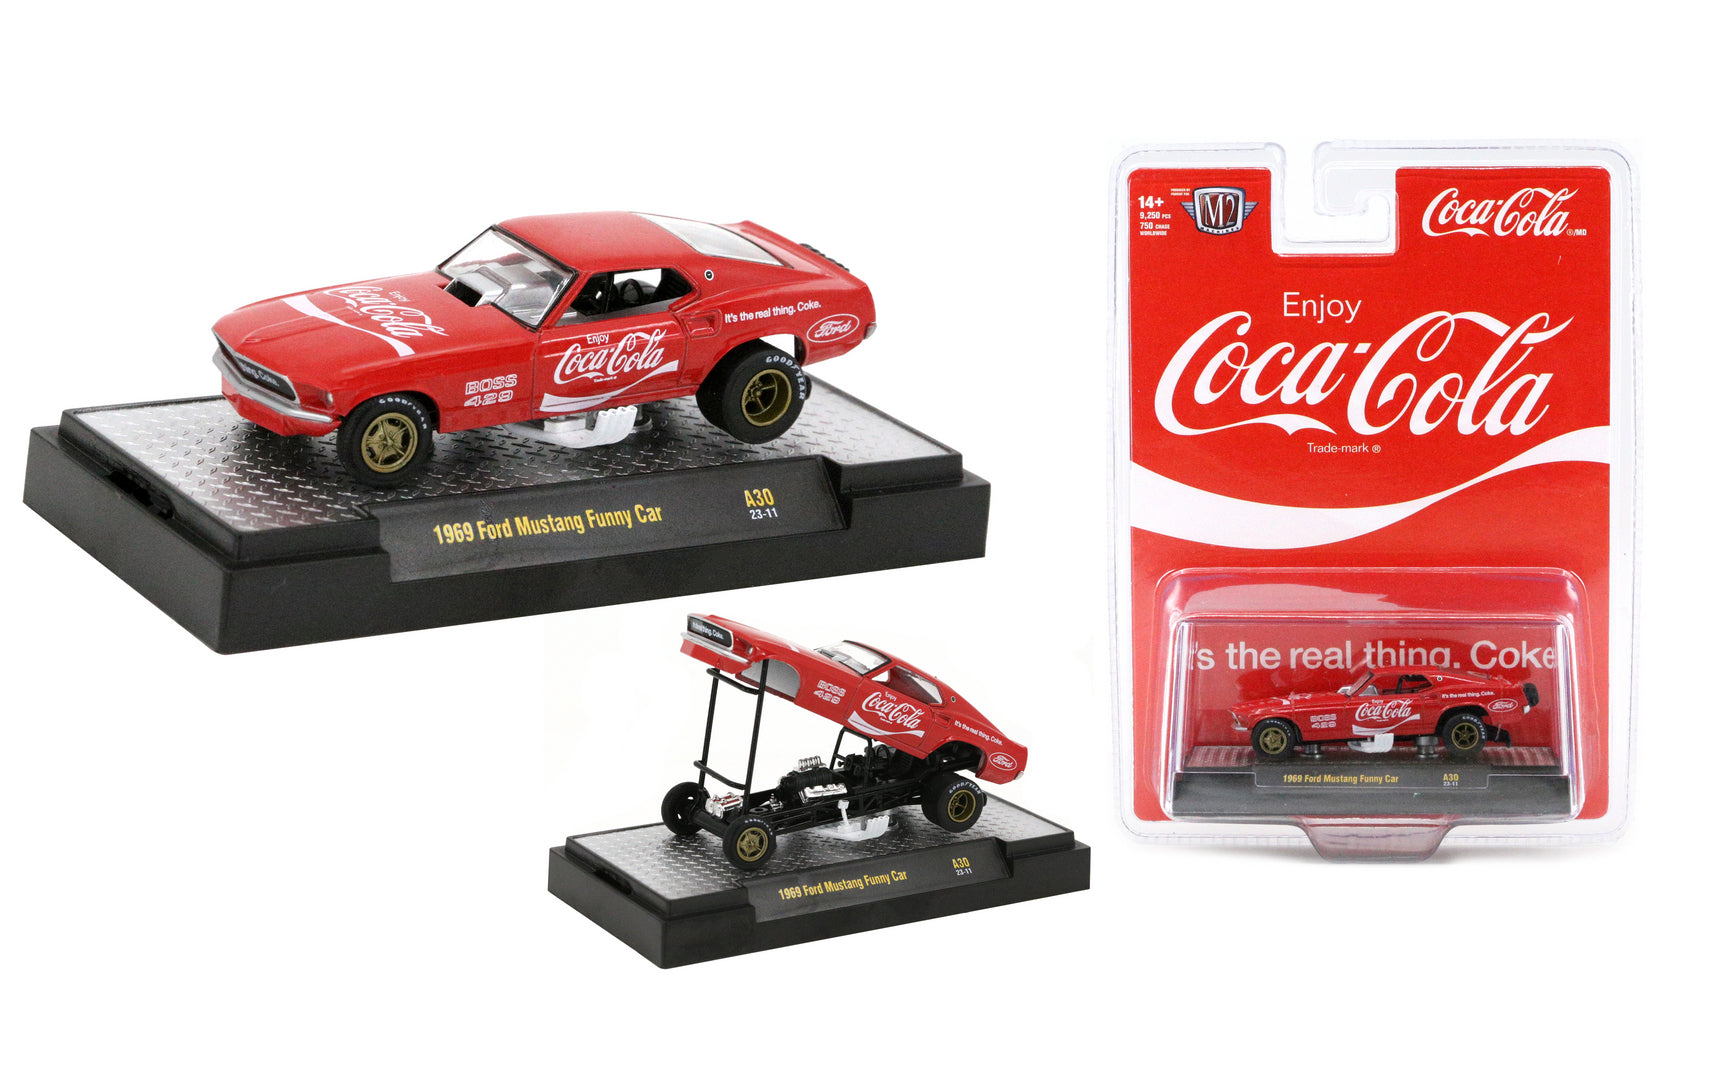 1969 Ford Mustang Funny Car, Coca-Cola, (Échelle-Scale 1:64)